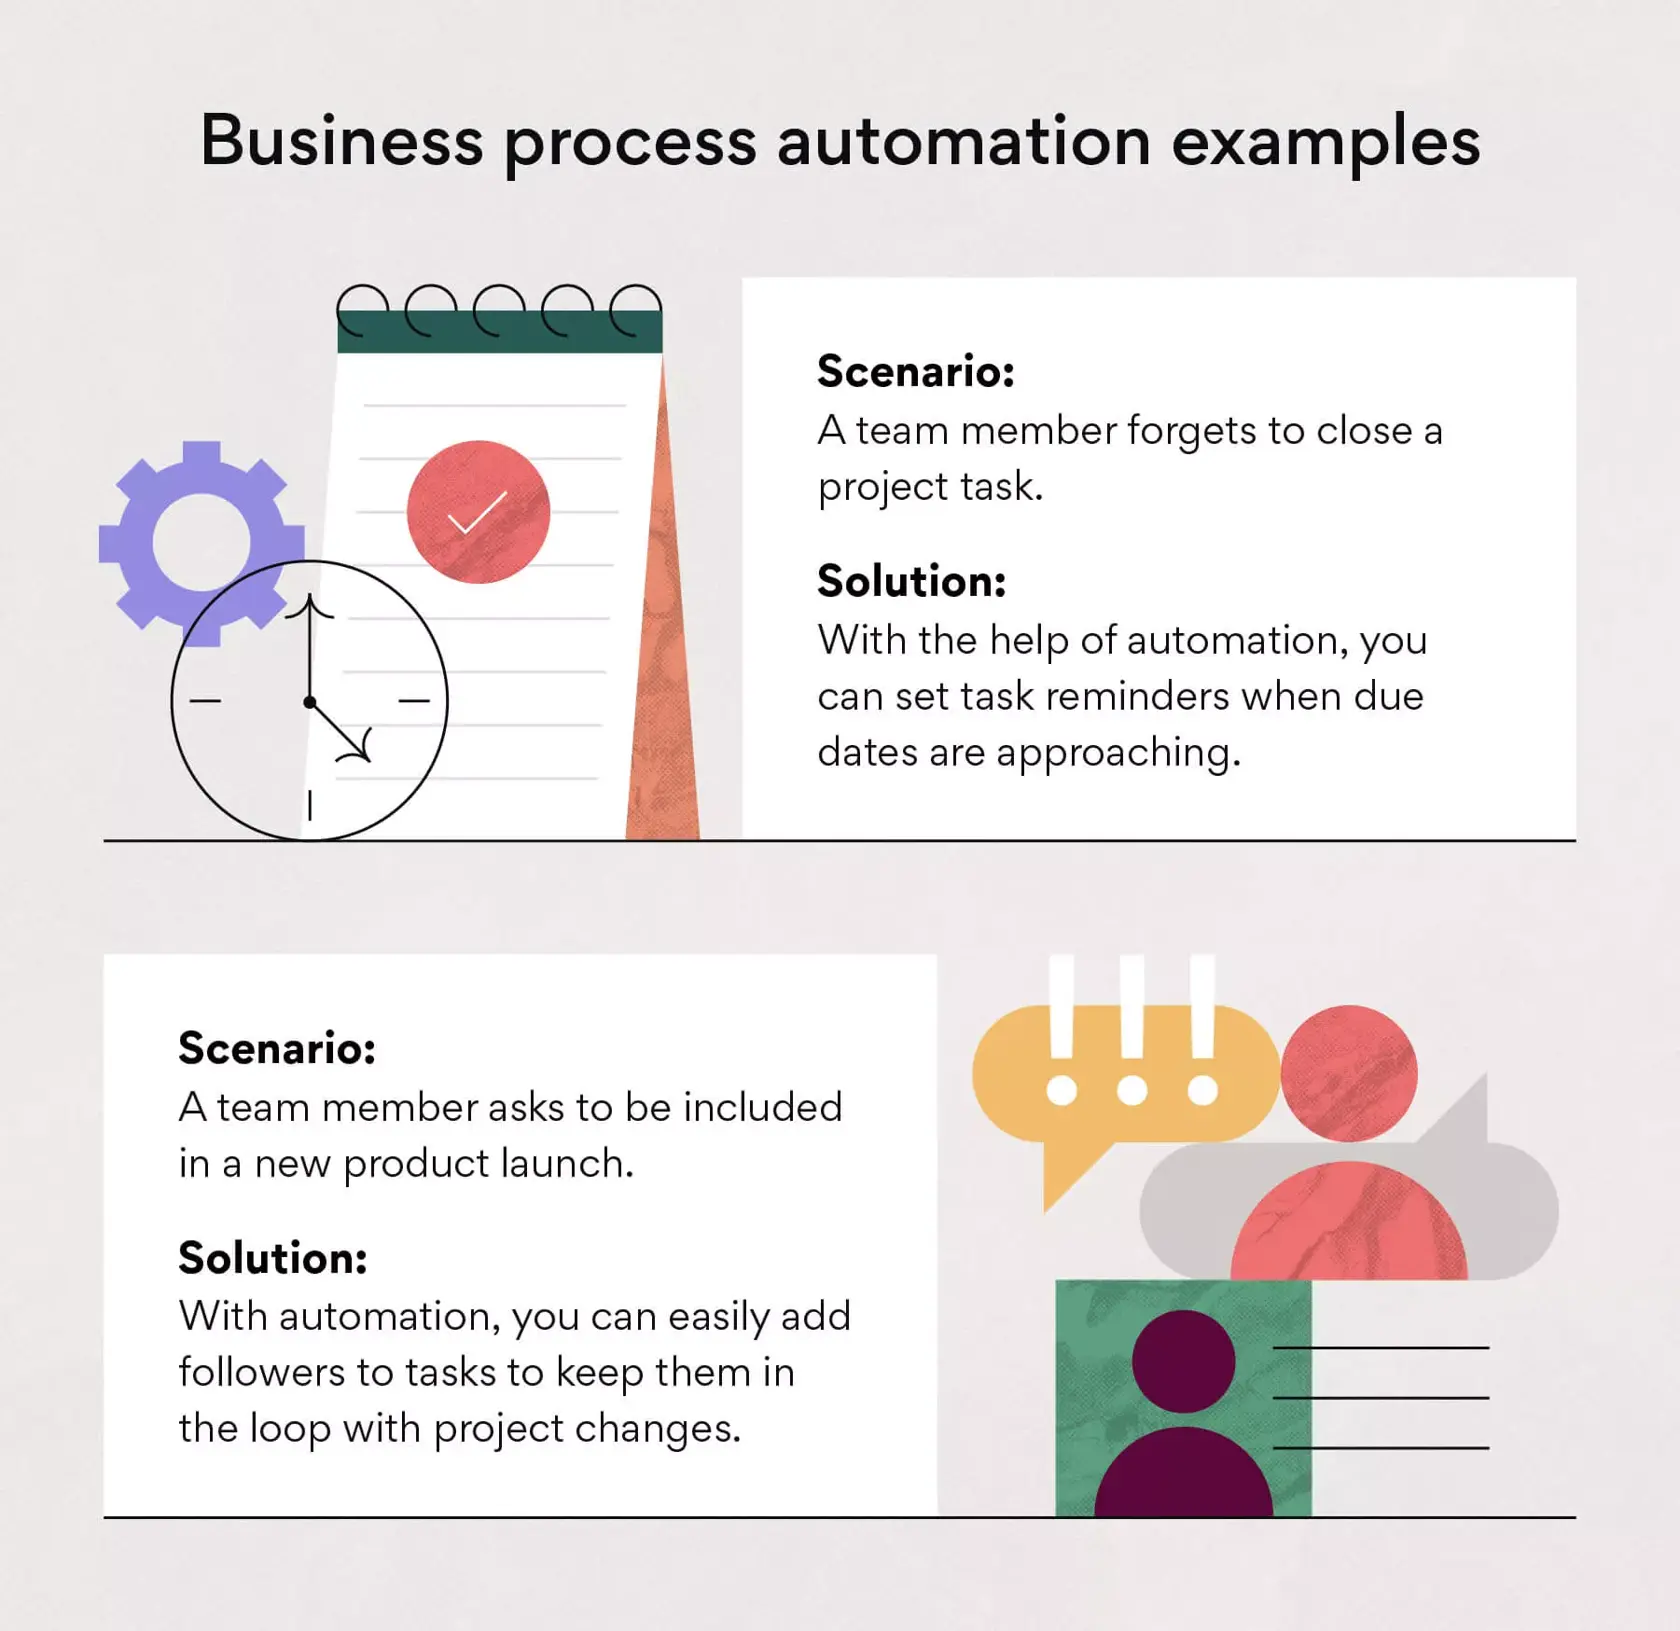 [inline illustration] Business process automation (example)